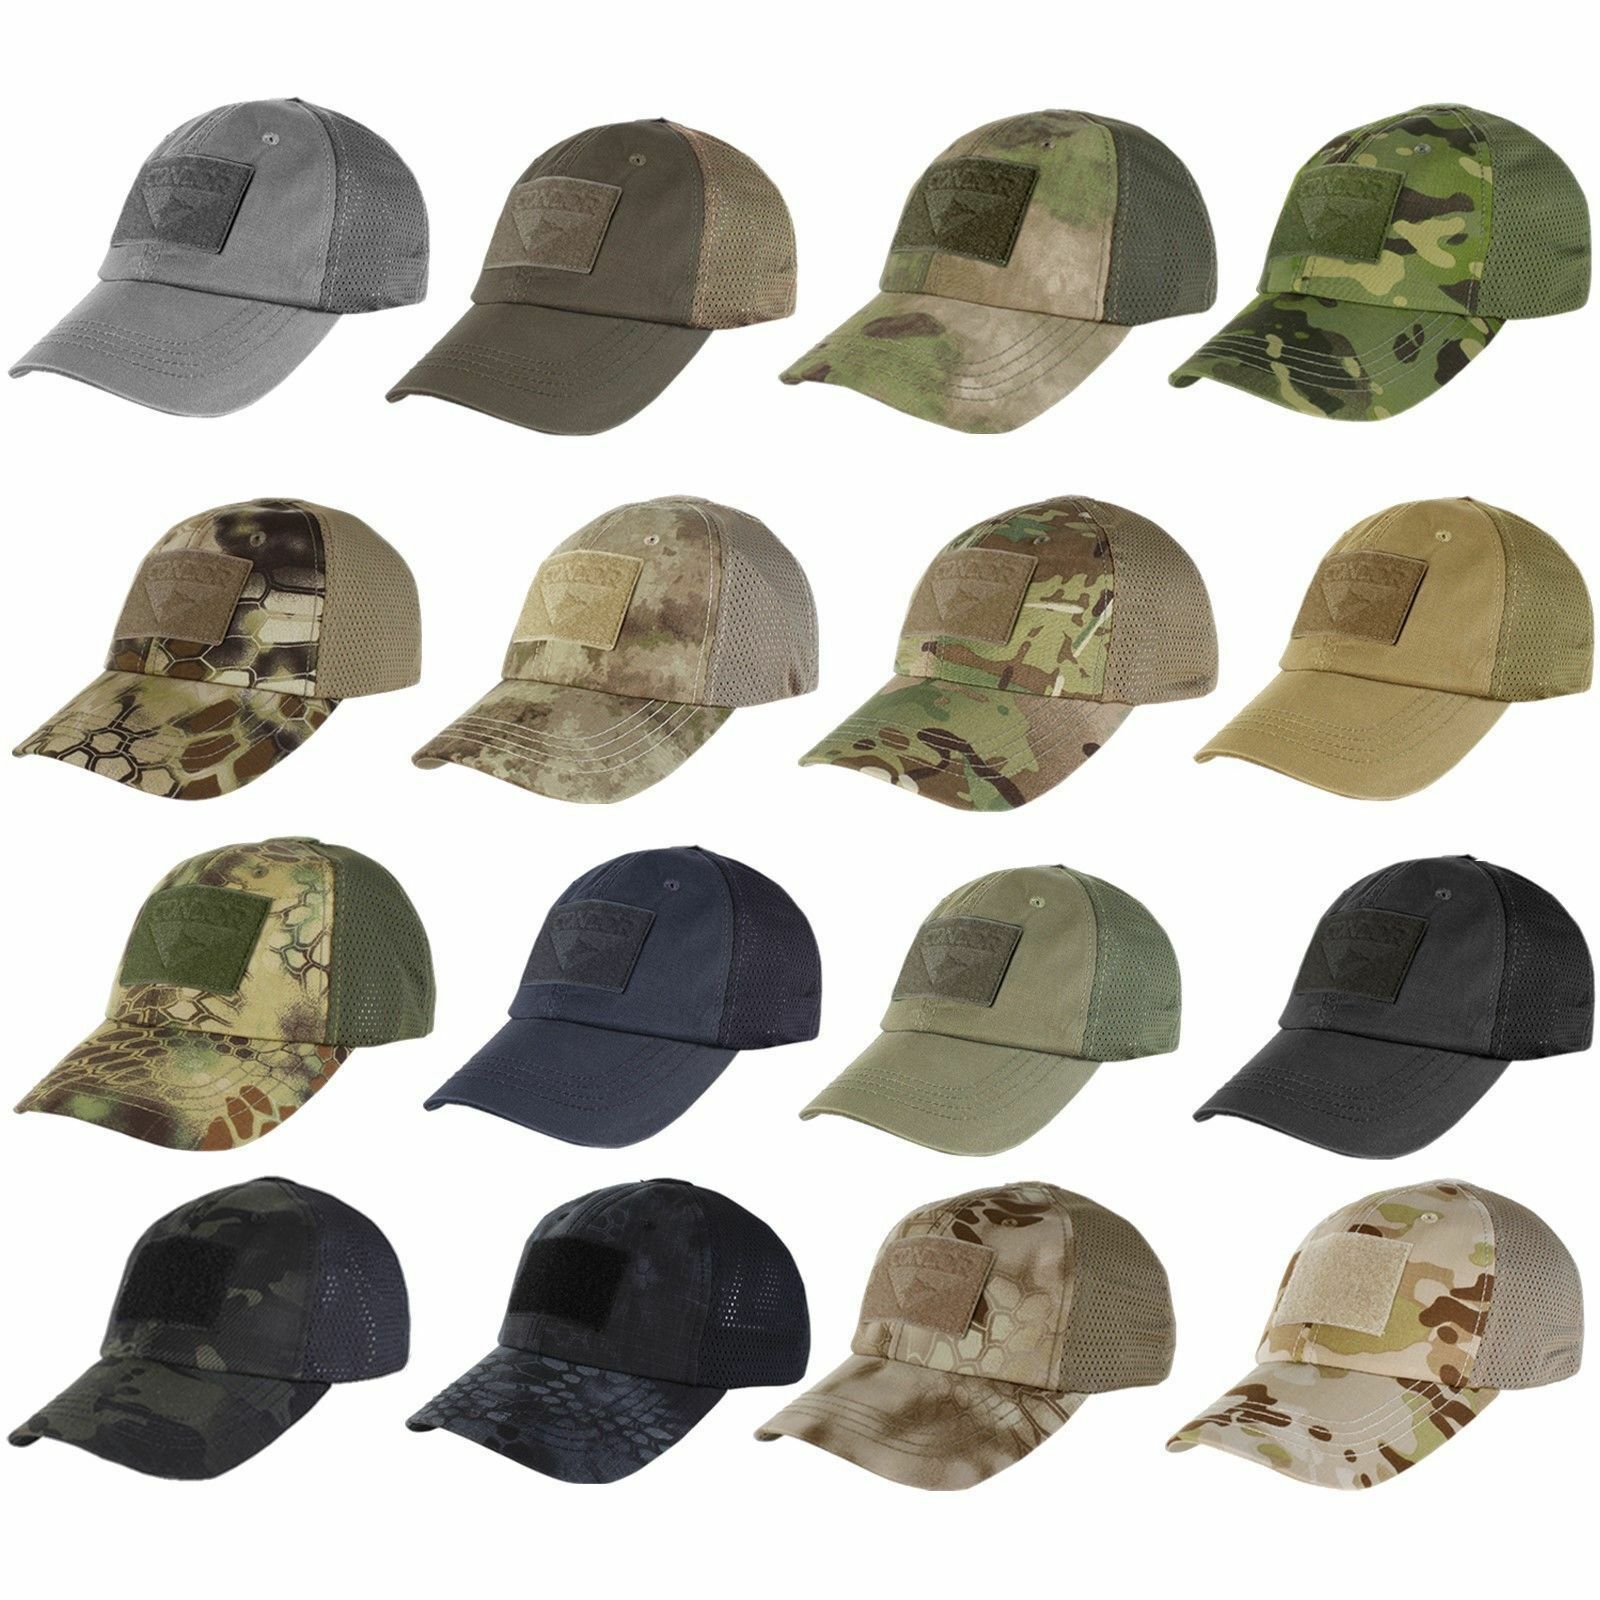 Condor Tcm Mesh Tactical Cap Operator Contractor Shooter Hat (multiple Choice)